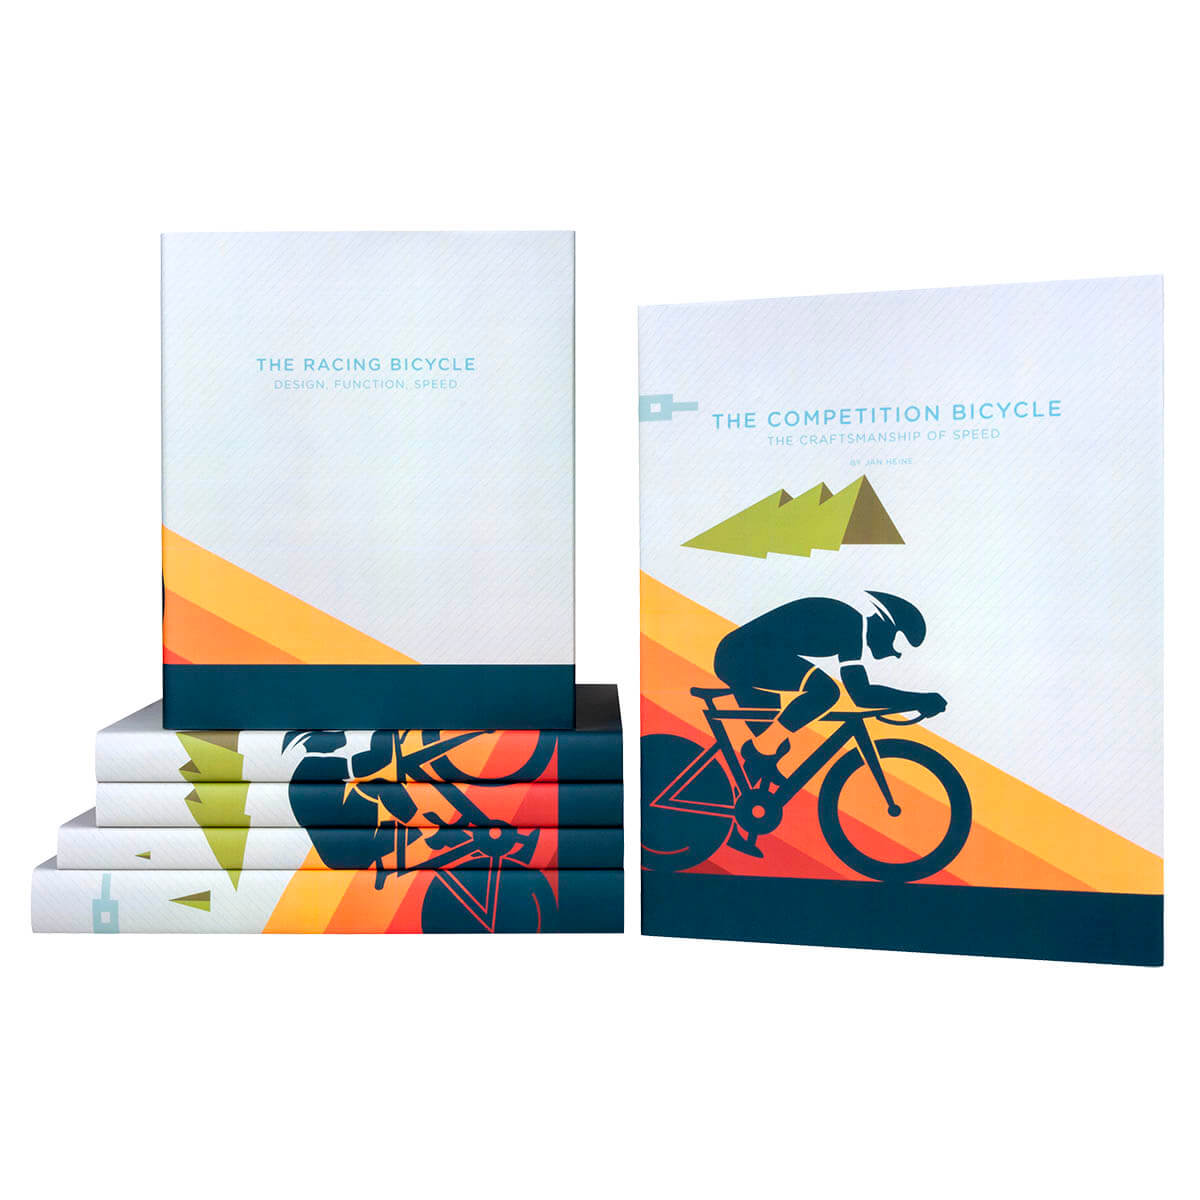 JuniperCustom Cycling Book Sets, a perfect gift for the reader or cyclist in your life! Our custom book jackets make a statement on any shelf, and are great gifts or conversation starters!